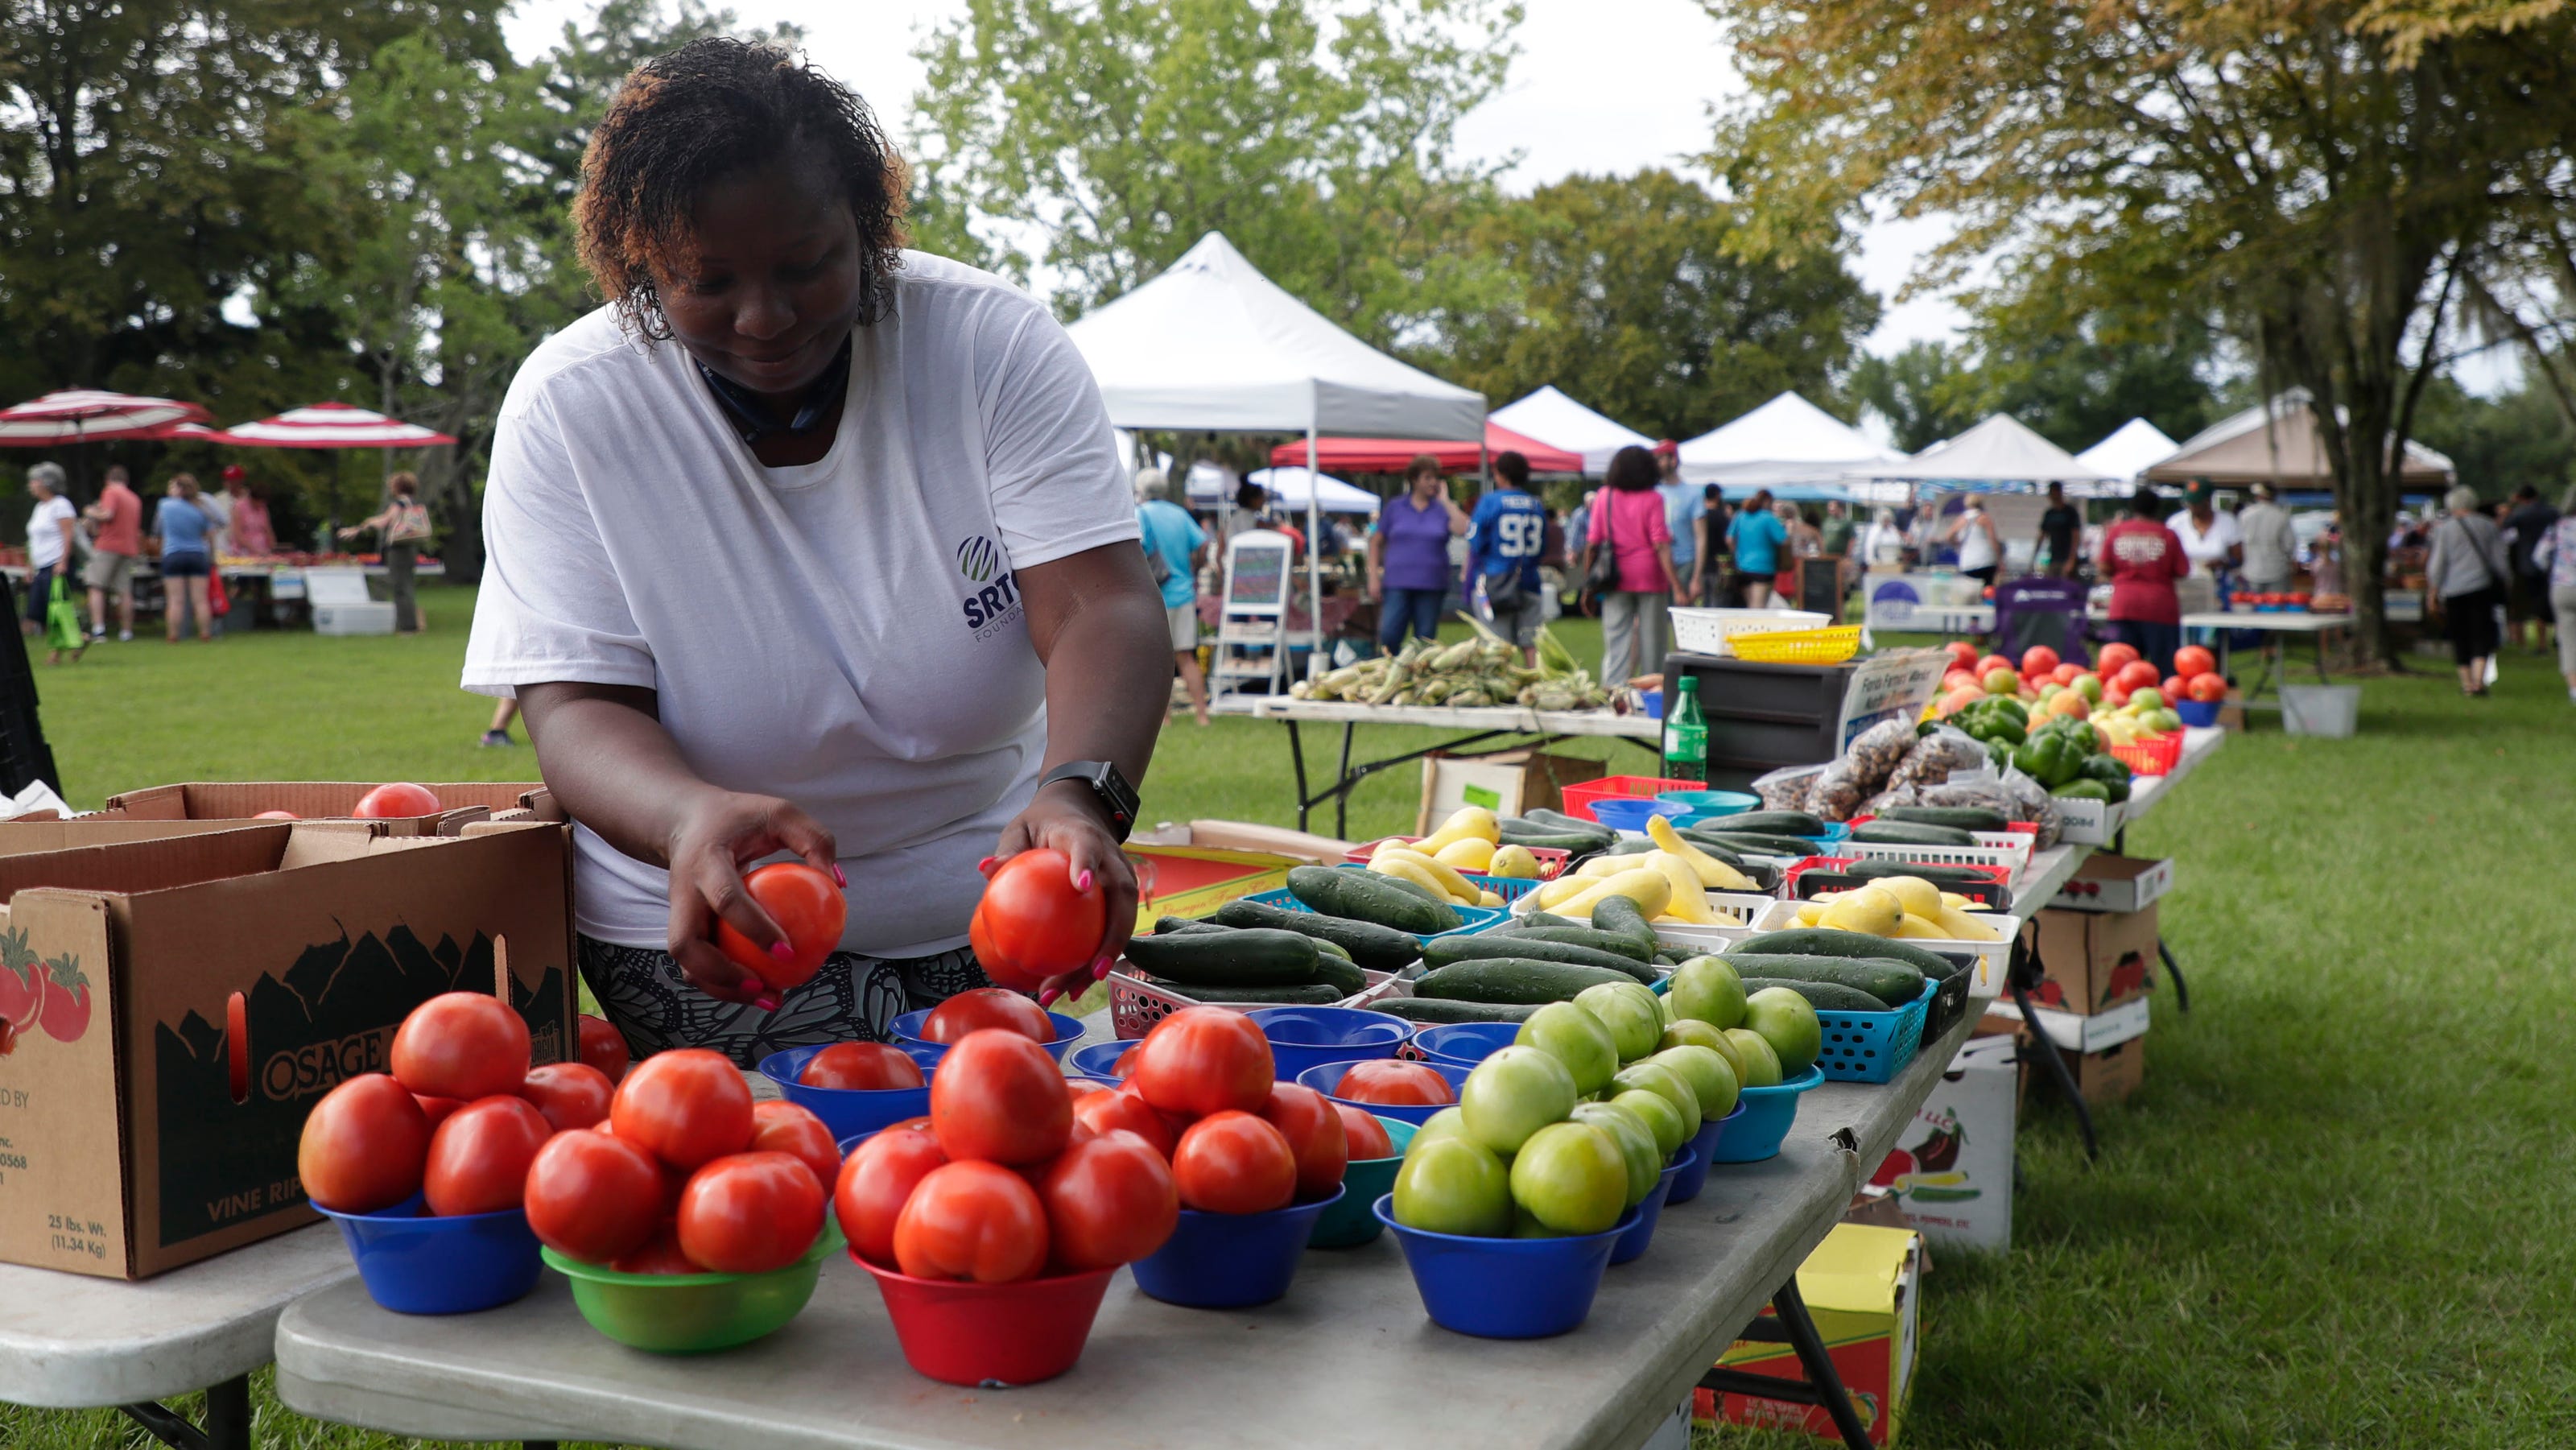 Tallahassee farmers market guide What produce and more is nearby?